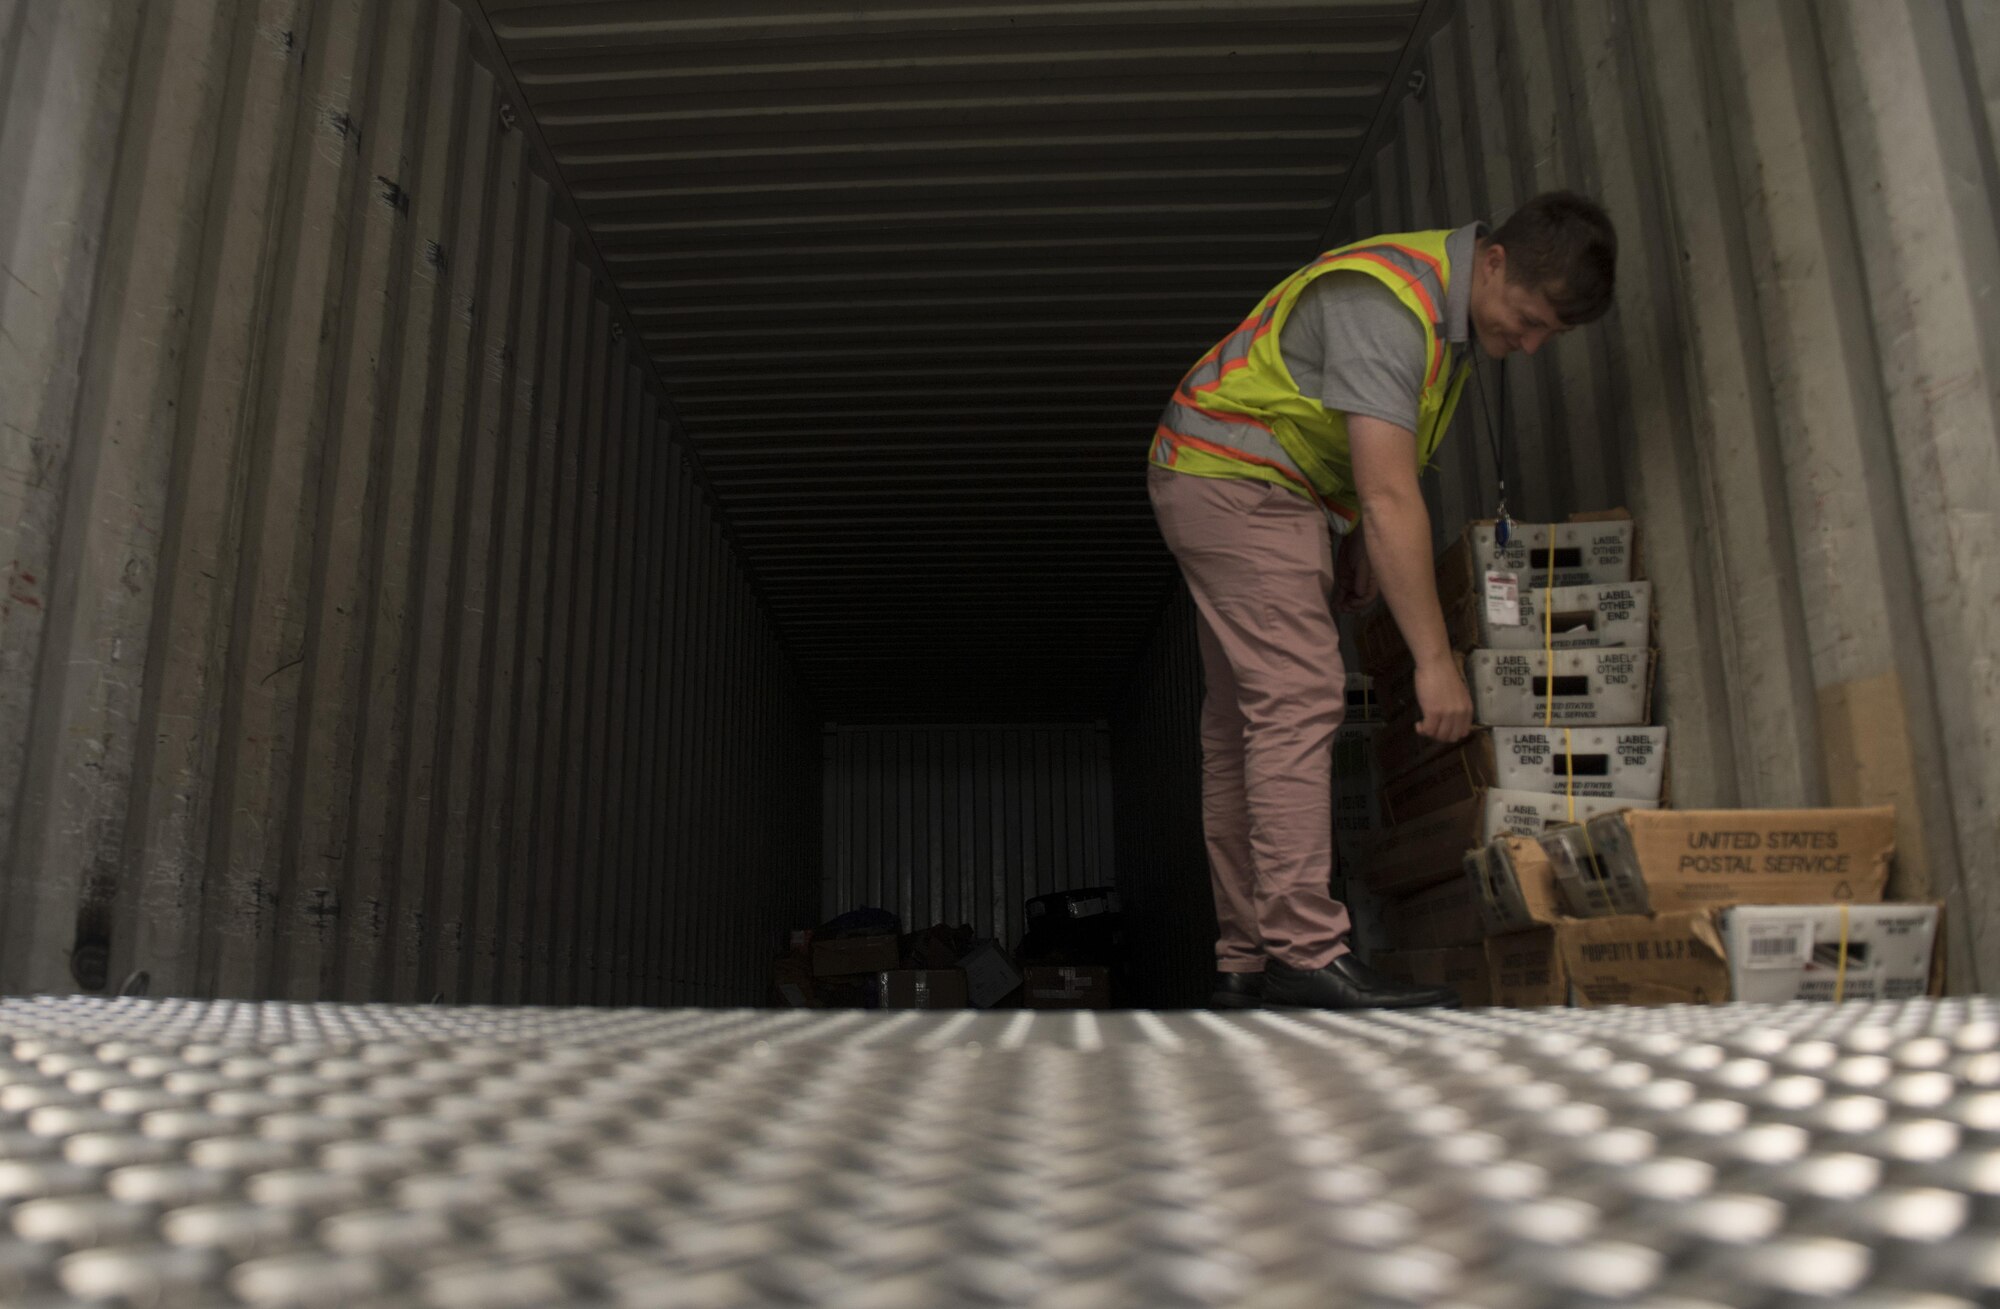 U.S. Air Force Staff Sgt. Patrick Murphy, U.S. Air Forces in Europe and Air Forces Africa Air Postal Squadron mail control postal specialist, inspects mail loaded onto a truck to ensure it is going to the right location in Frankfurt, Germany, Oct. 5, 2017. The USAFE AFAFRICA AIRPS has detachments in Frankfurt; London, England; and Istanbul, Turkey to oversee the offloading, inspecting, sorting, and loading onto trucks the mail undergoes. (U.S. Air Force photo by Senior Airman Tryphena Mayhugh)